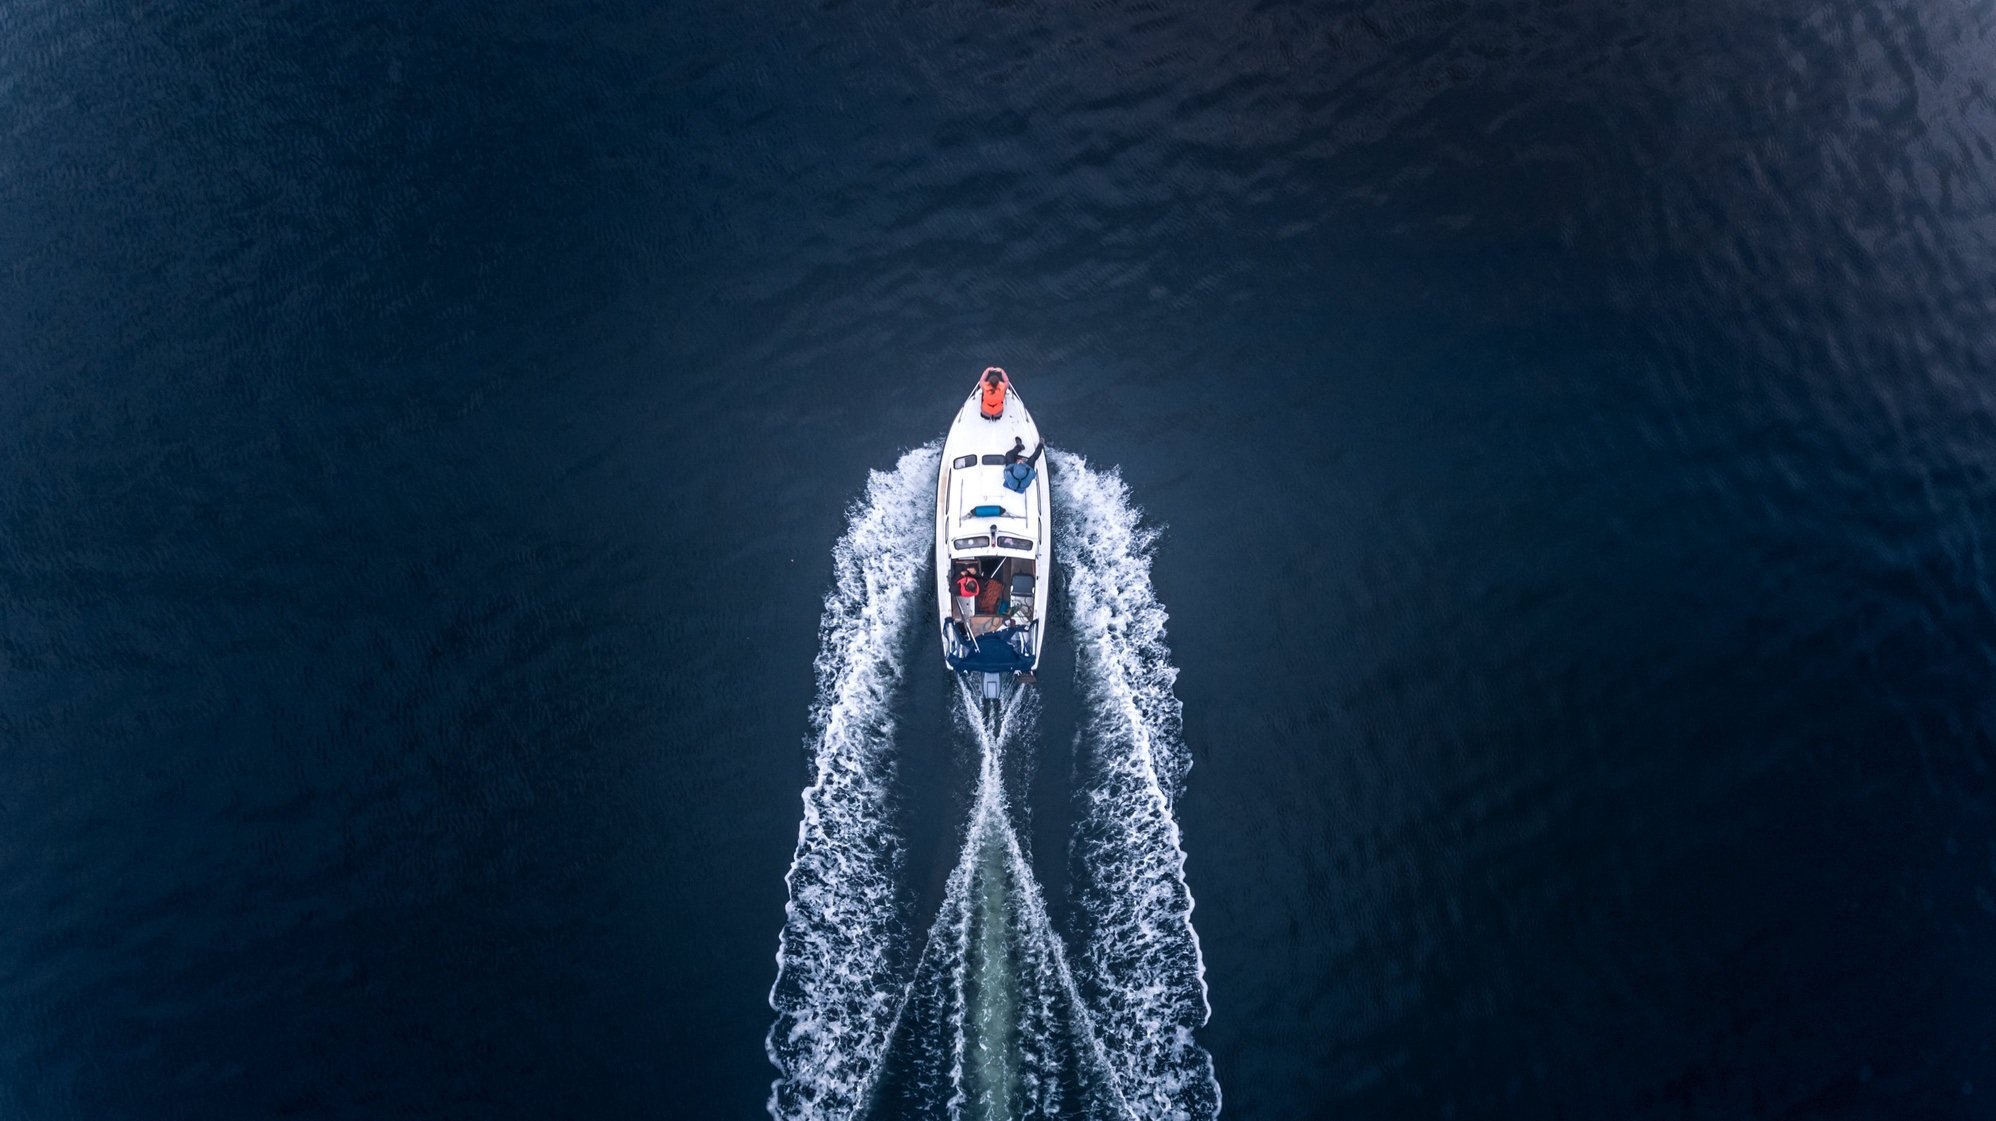 Family on small boat cruising in the evening - top view from a drone